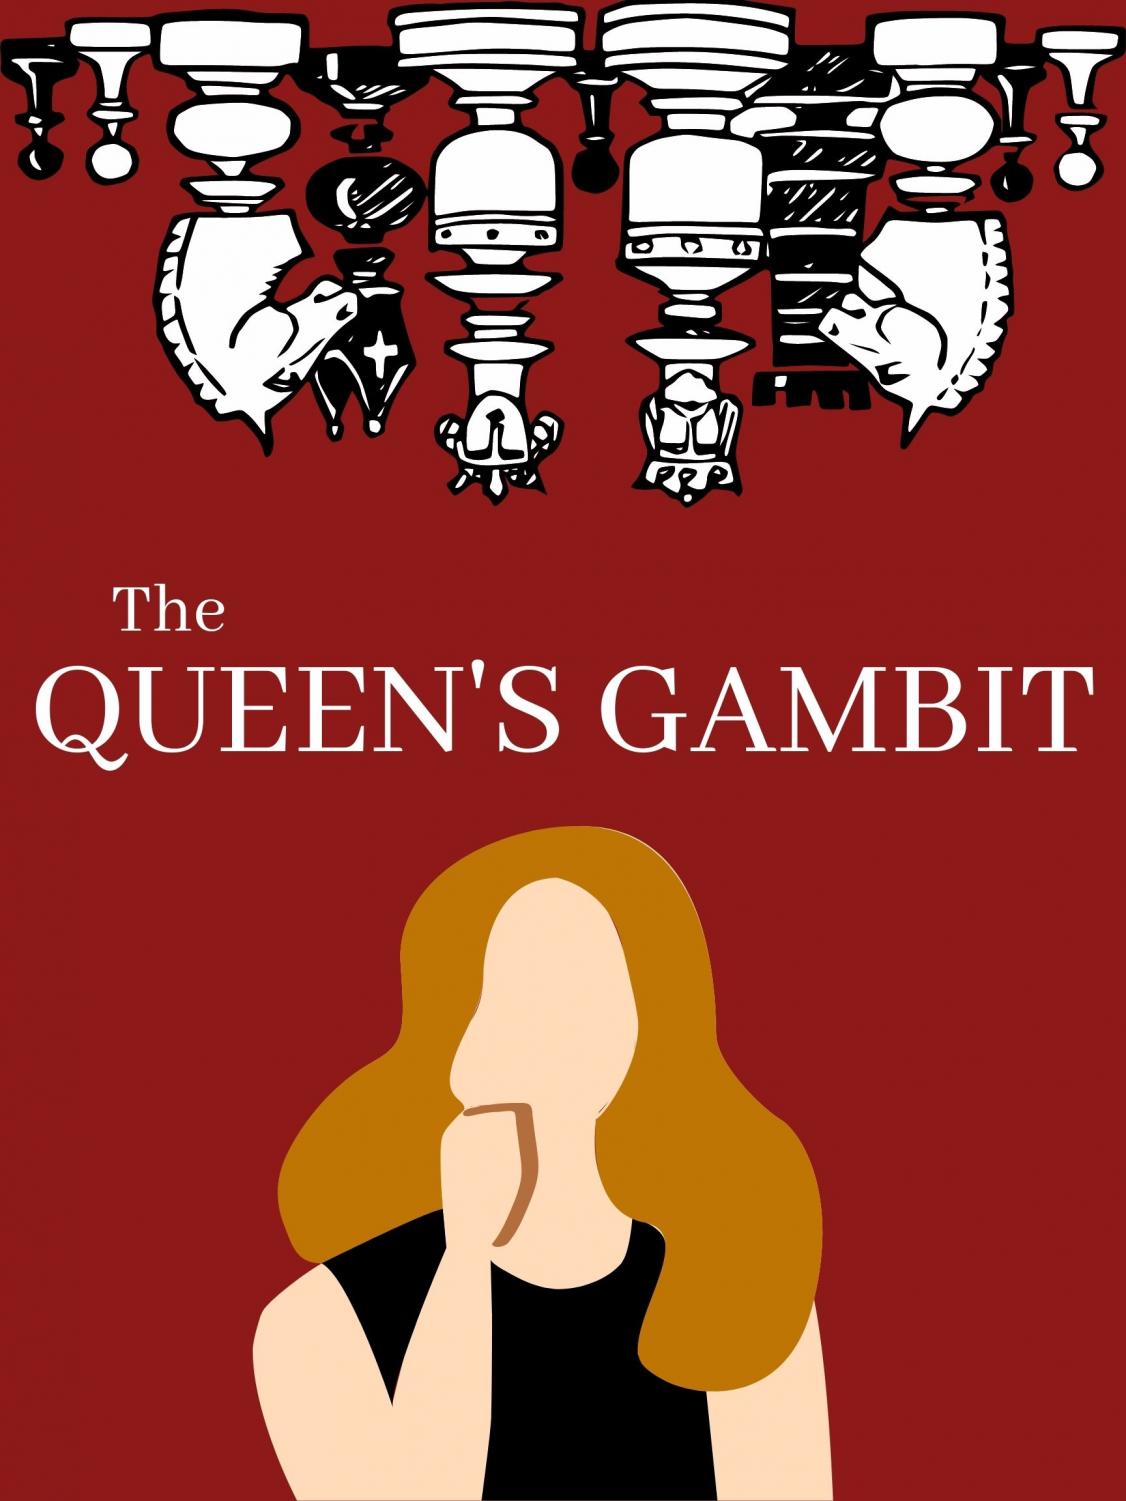 The Queen's Gambit': The Lost Pages - Book and Film Globe